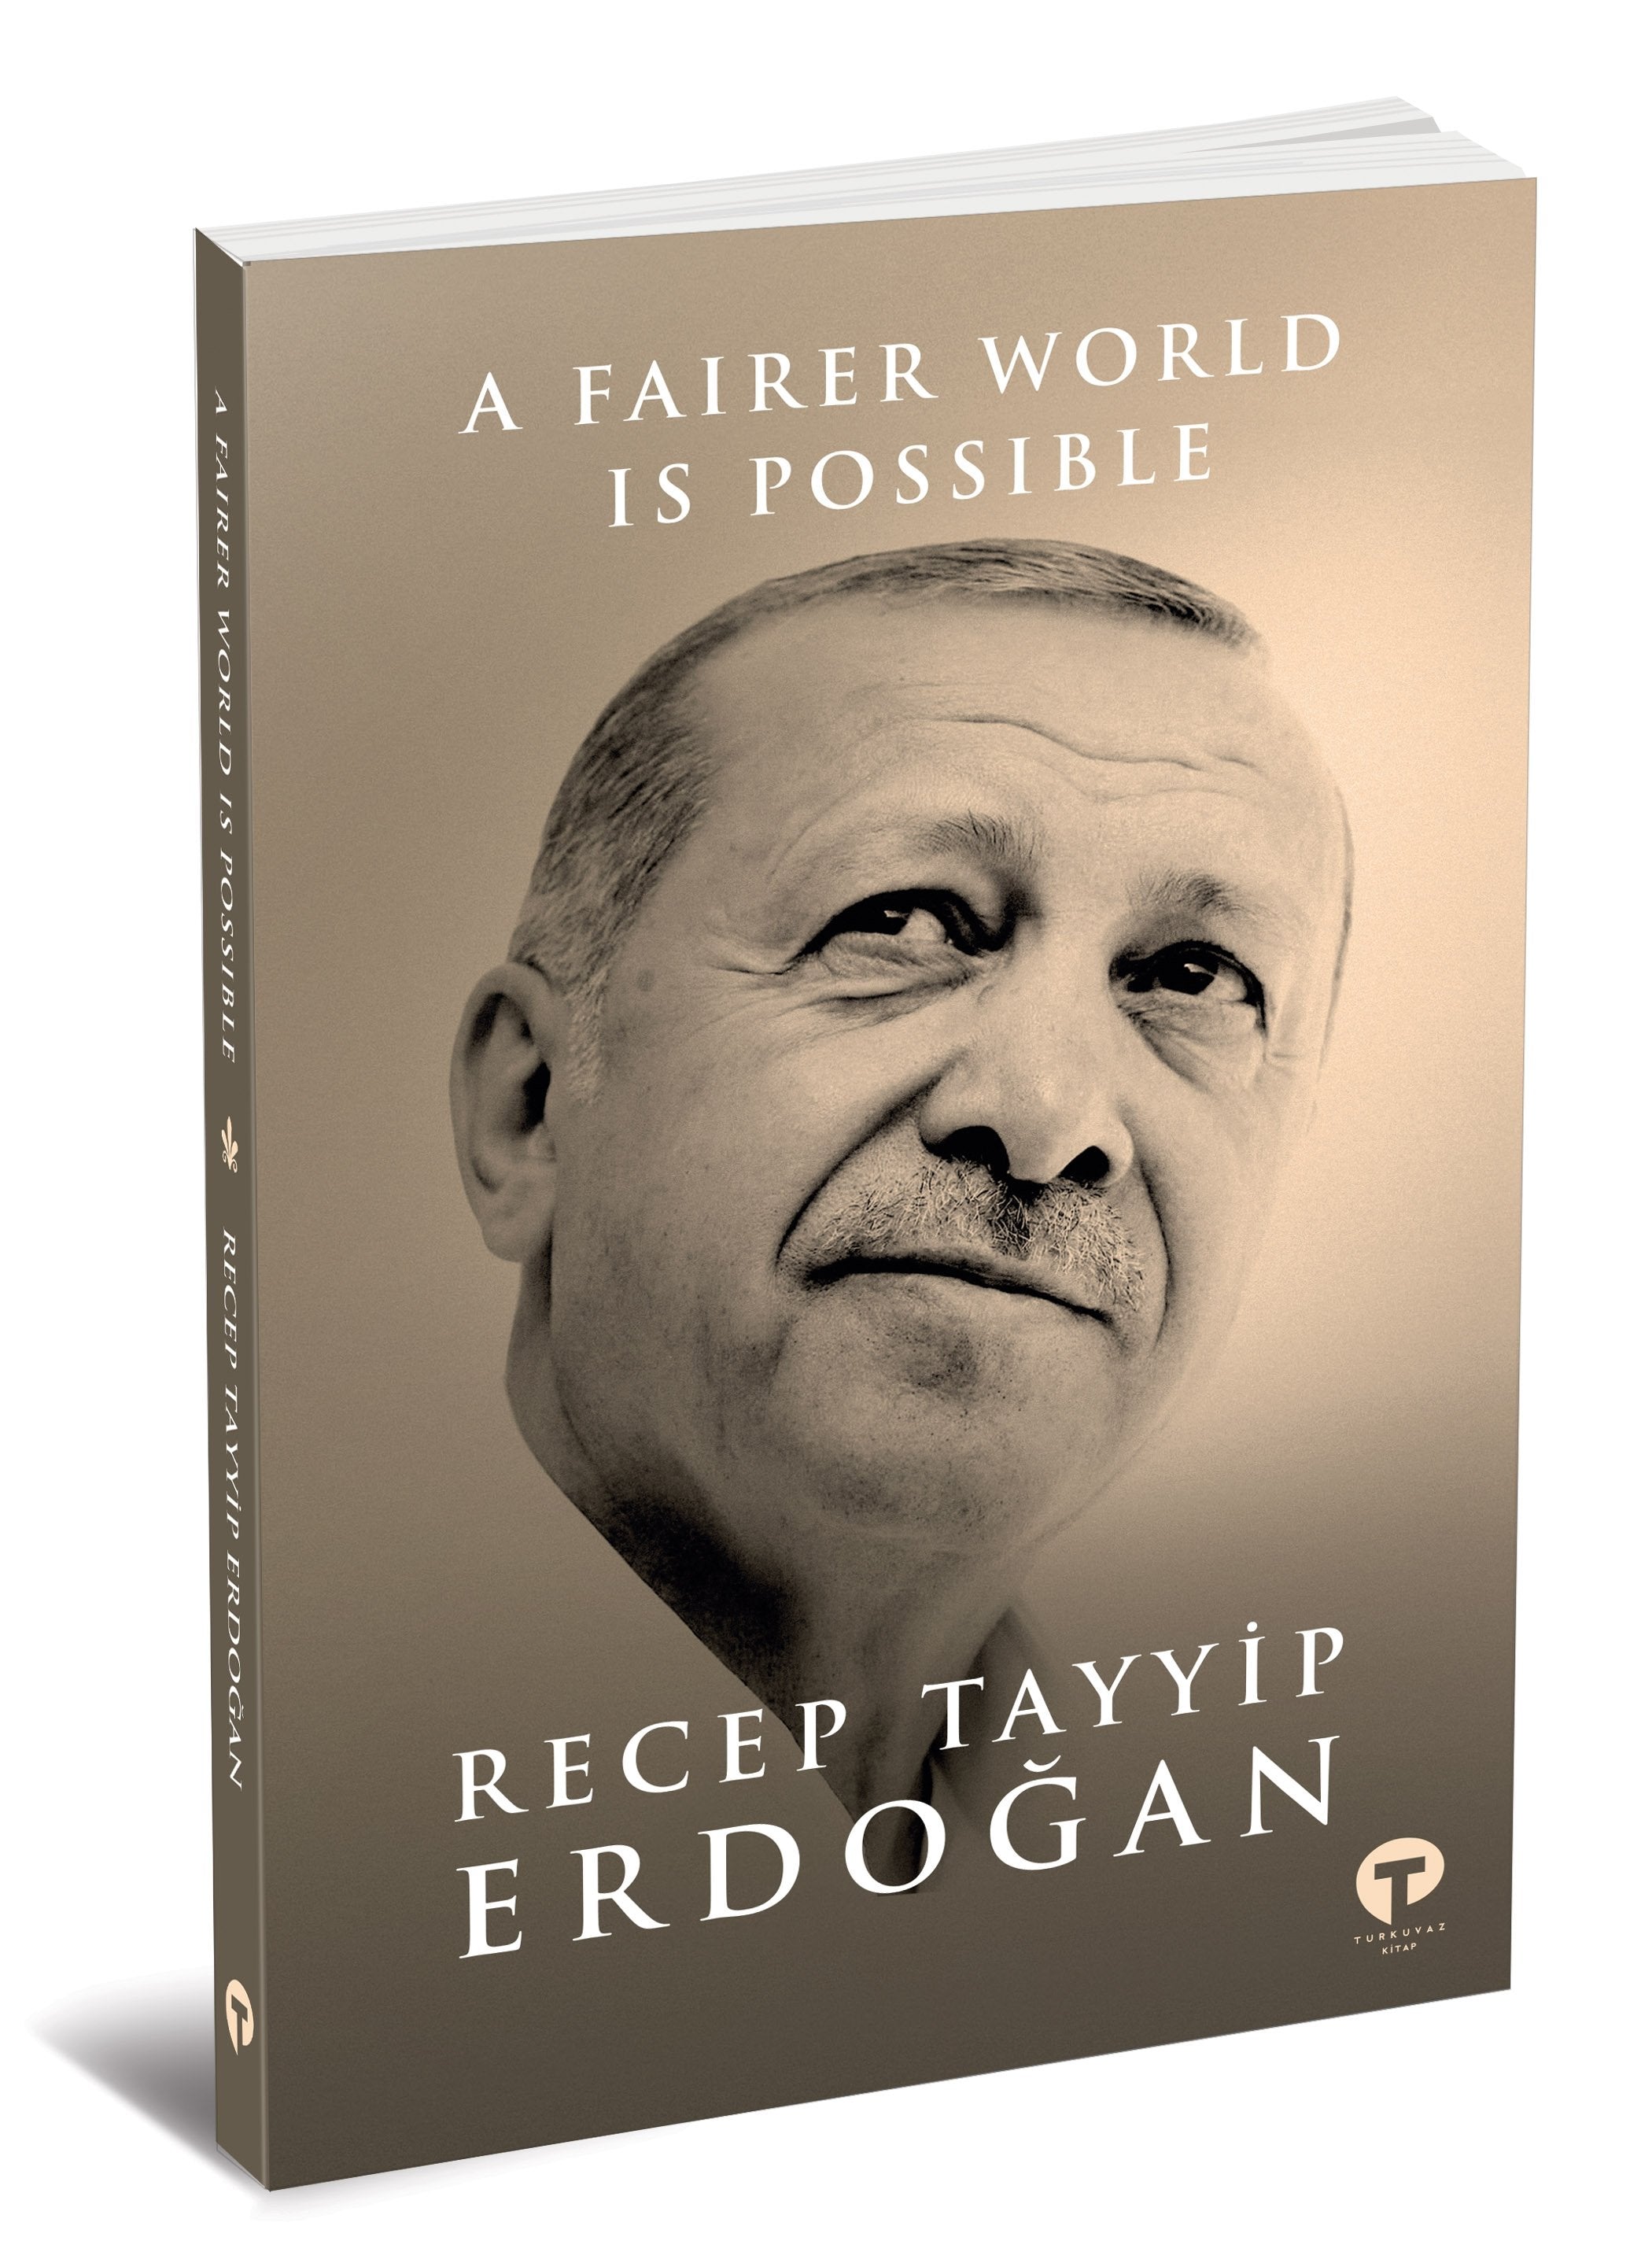 A Fairer World Is Possible: A Proposed Model for a United Nations Reform, by Recep Tayyip Erdogan